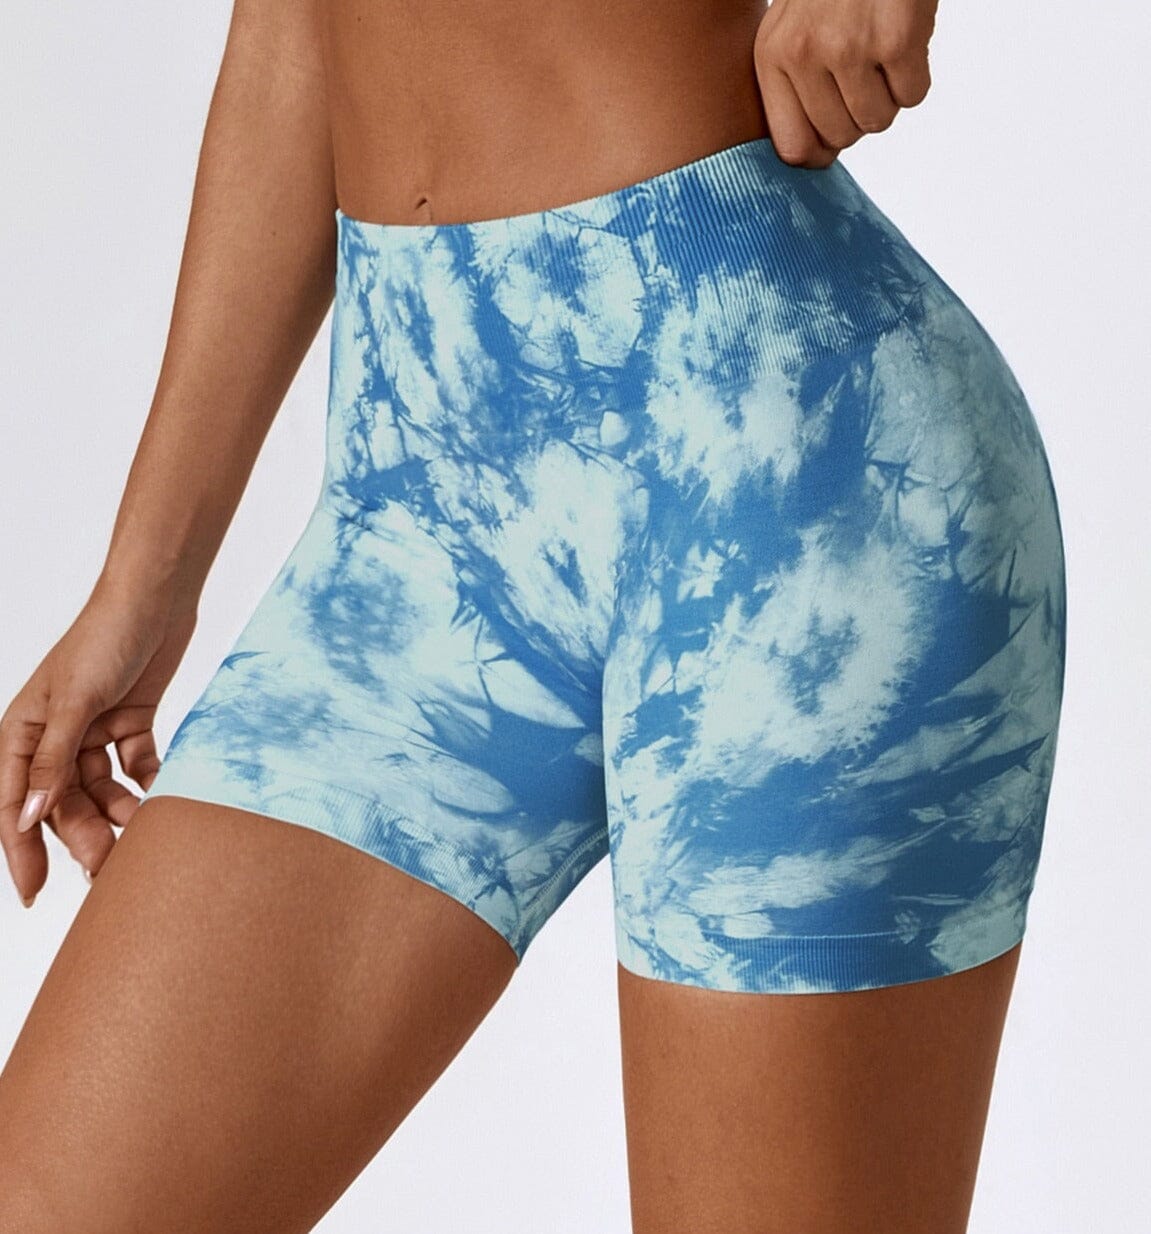 Ease Printed Seamless Shorts Shorts Starlethics White Ink S 